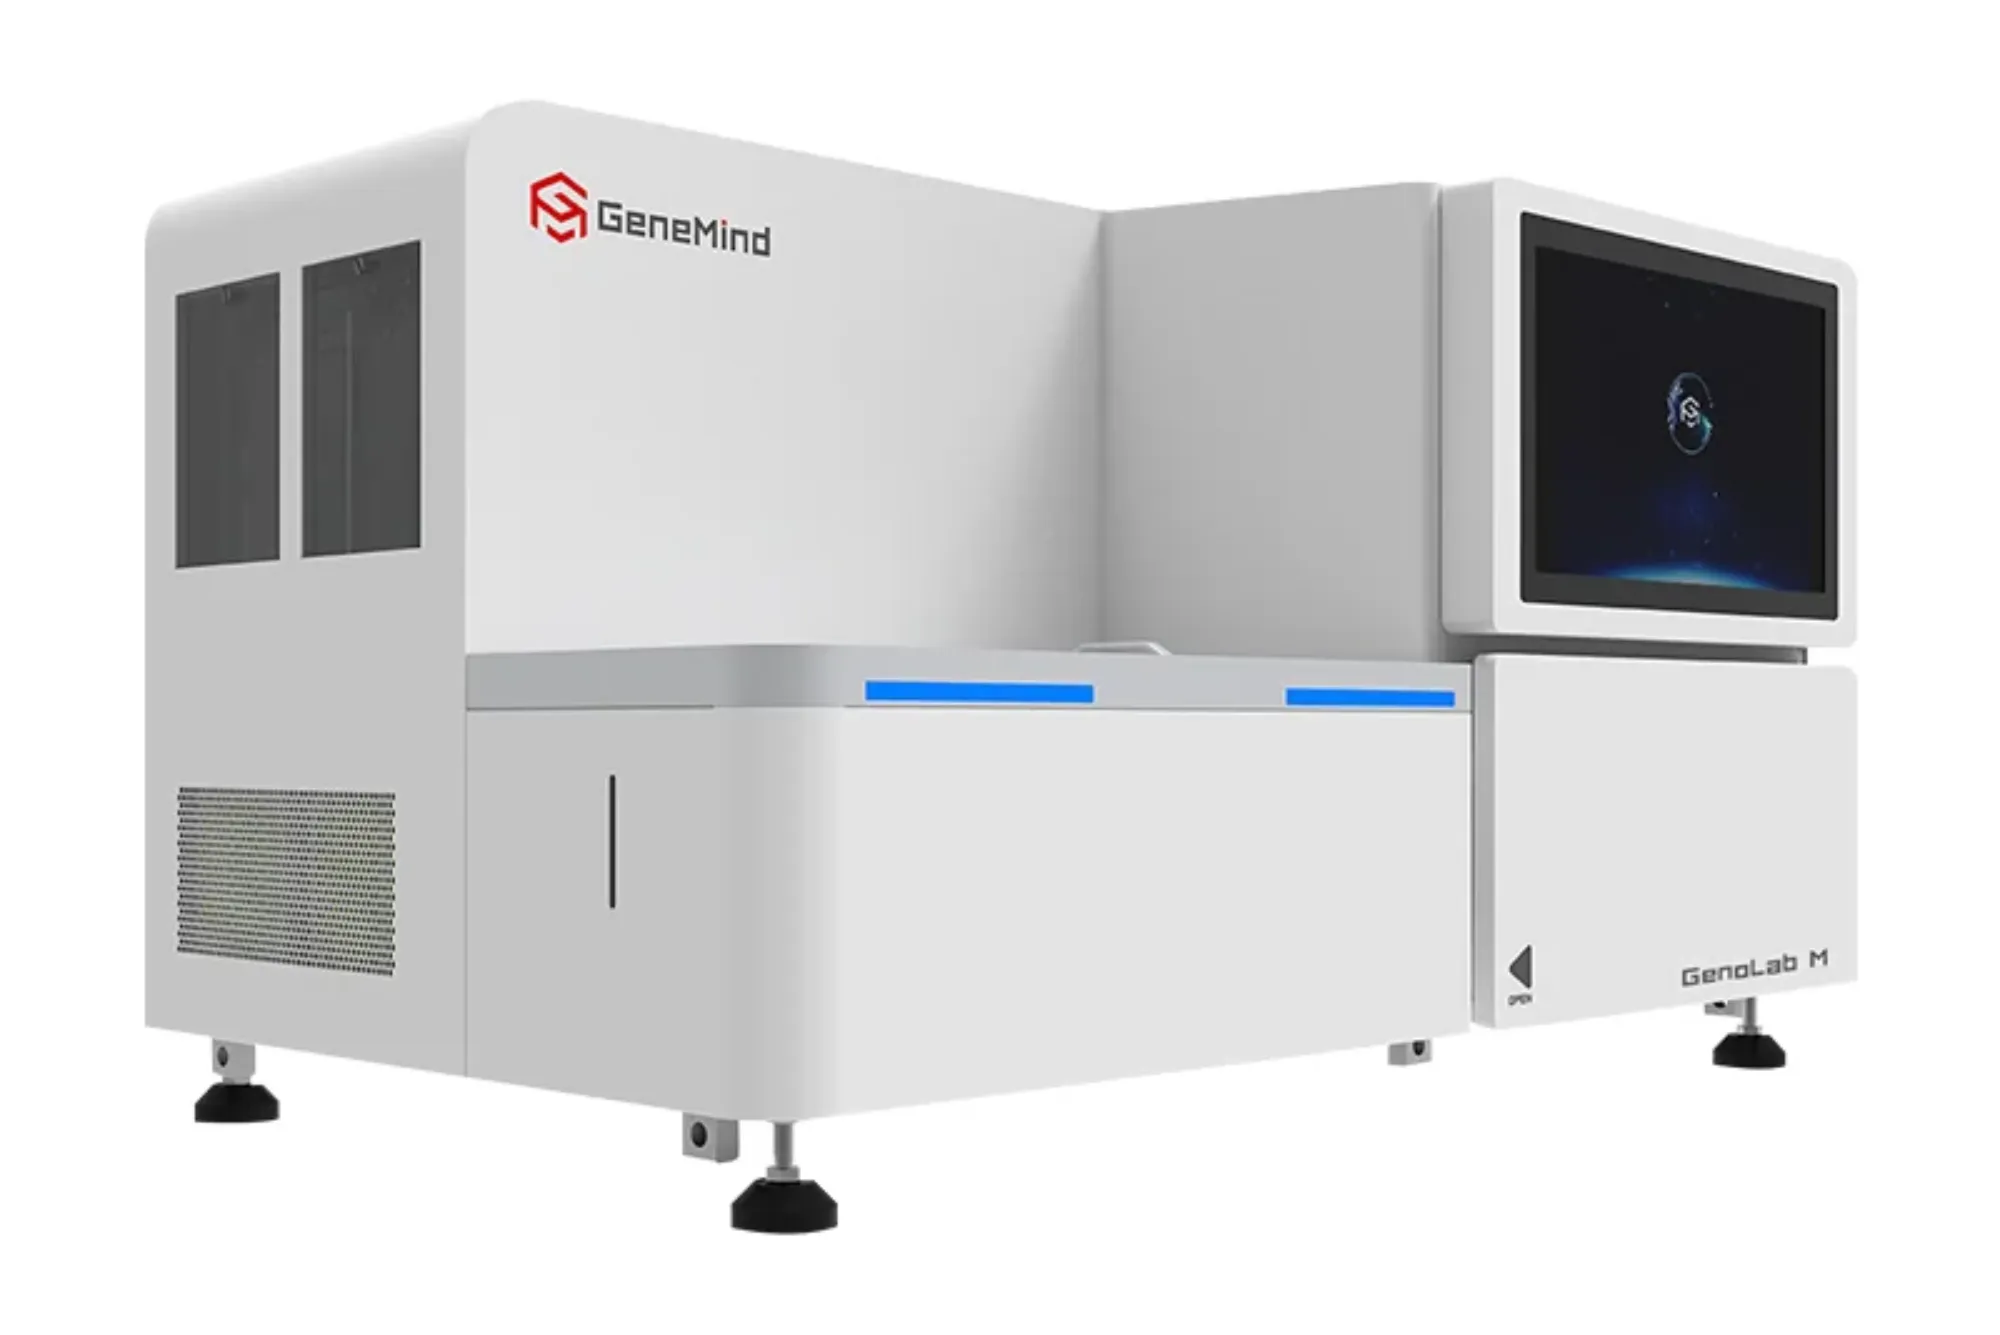 GeneMind Revolutionizing Genetic Sequencing with Efficiency, Accuracy, Customizability, and Affordability